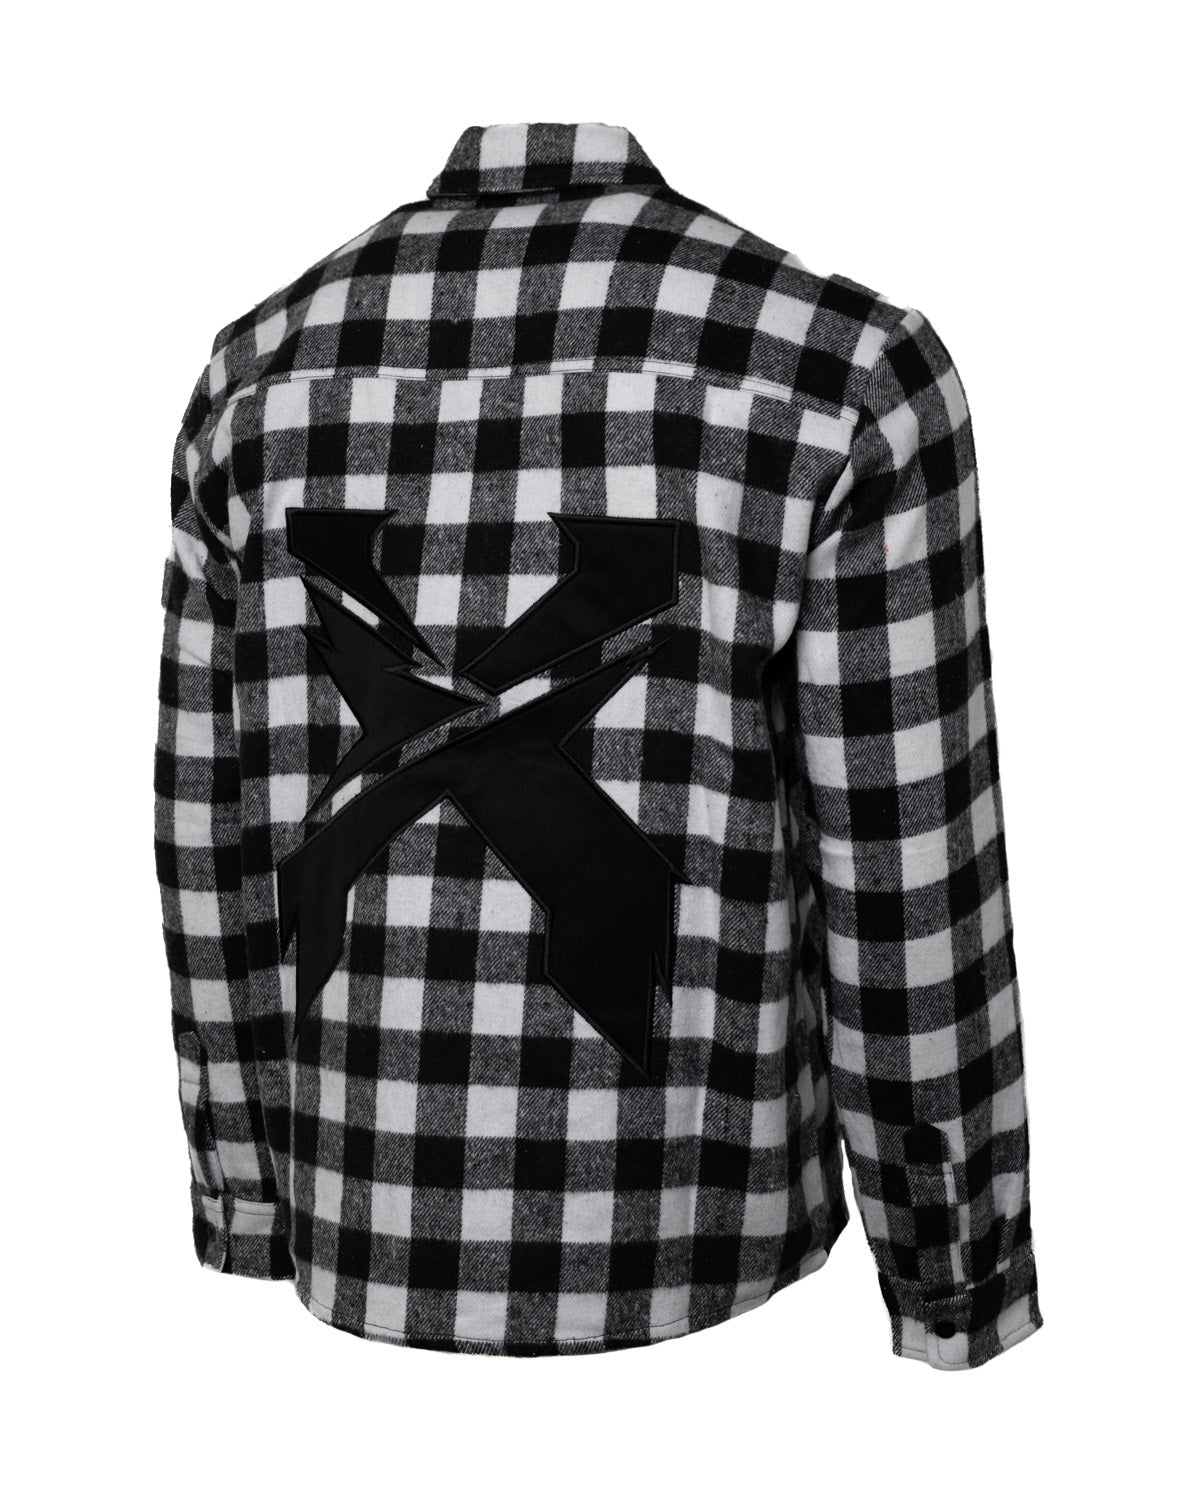 Excision Embroidered Flannel (Black/White)